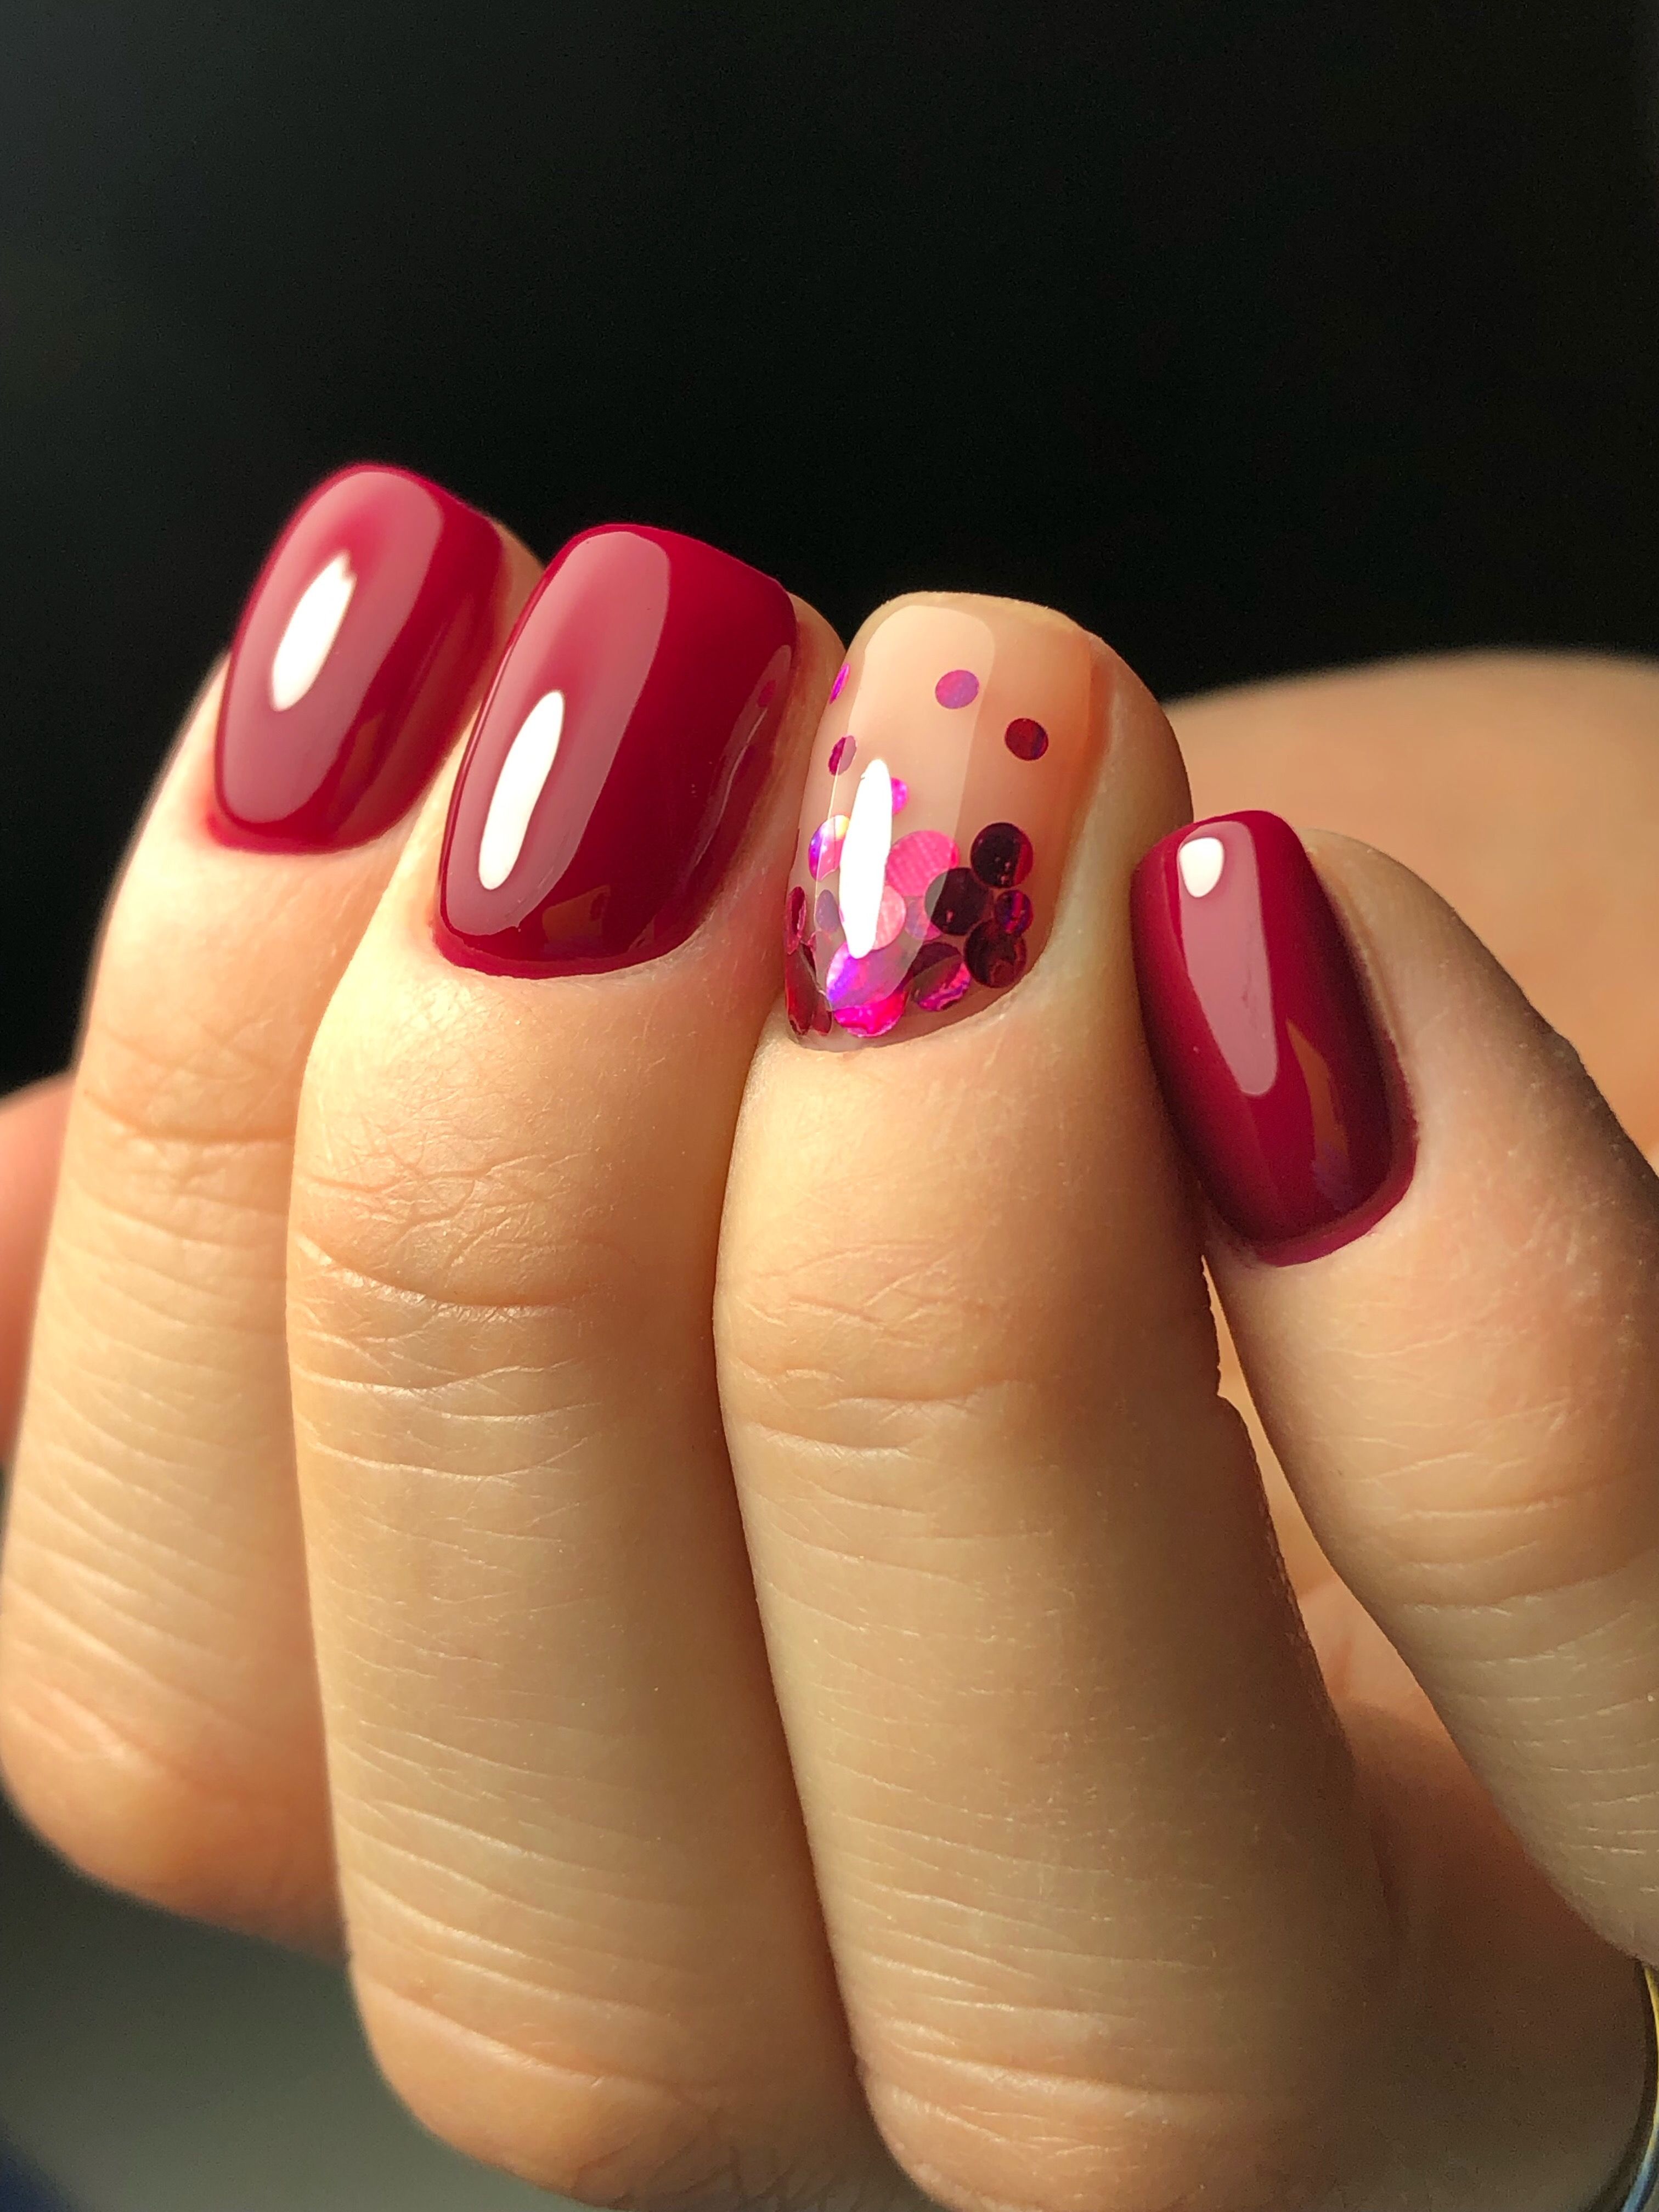 Pin By Dana On Nogti Burgundy Nails Dipped Nails Gorgeous Nails